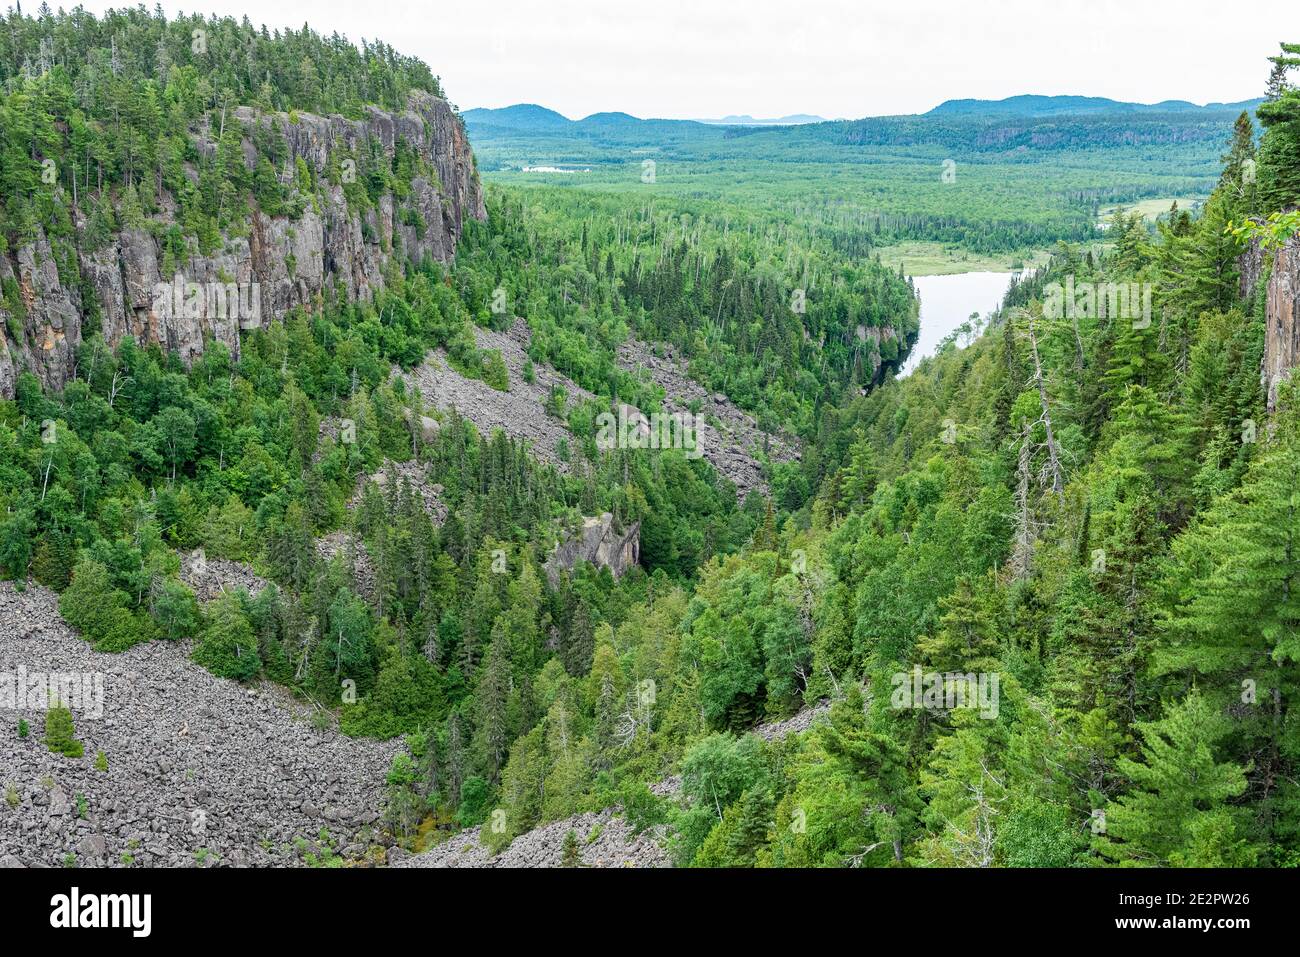 Ouimet Canyon provincial park, in the area of Thunder Bay, in Ontario, Canada. Stock Photo